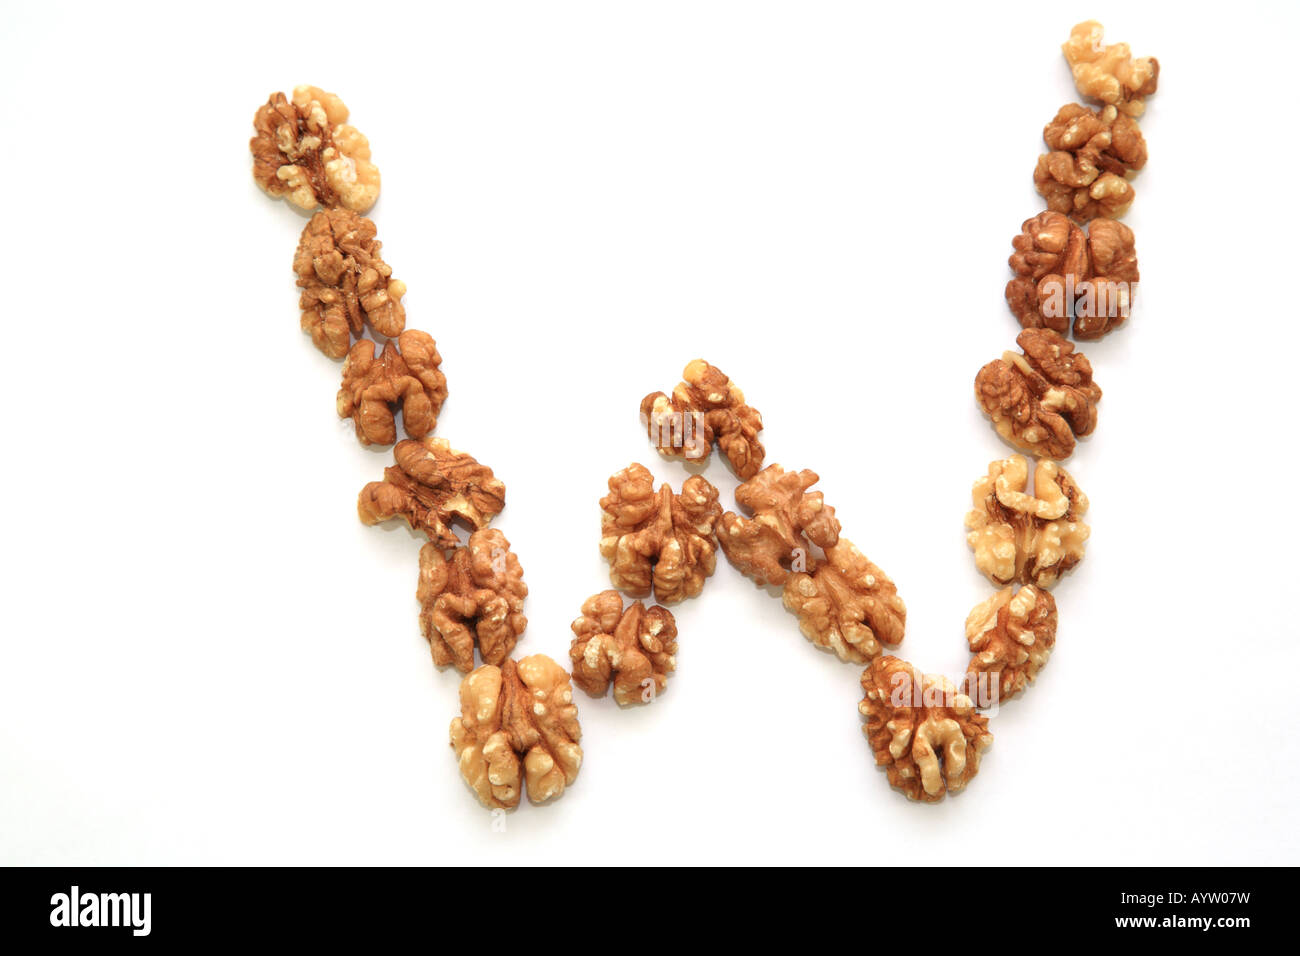 The letter W made up from walnuts Stock Photo